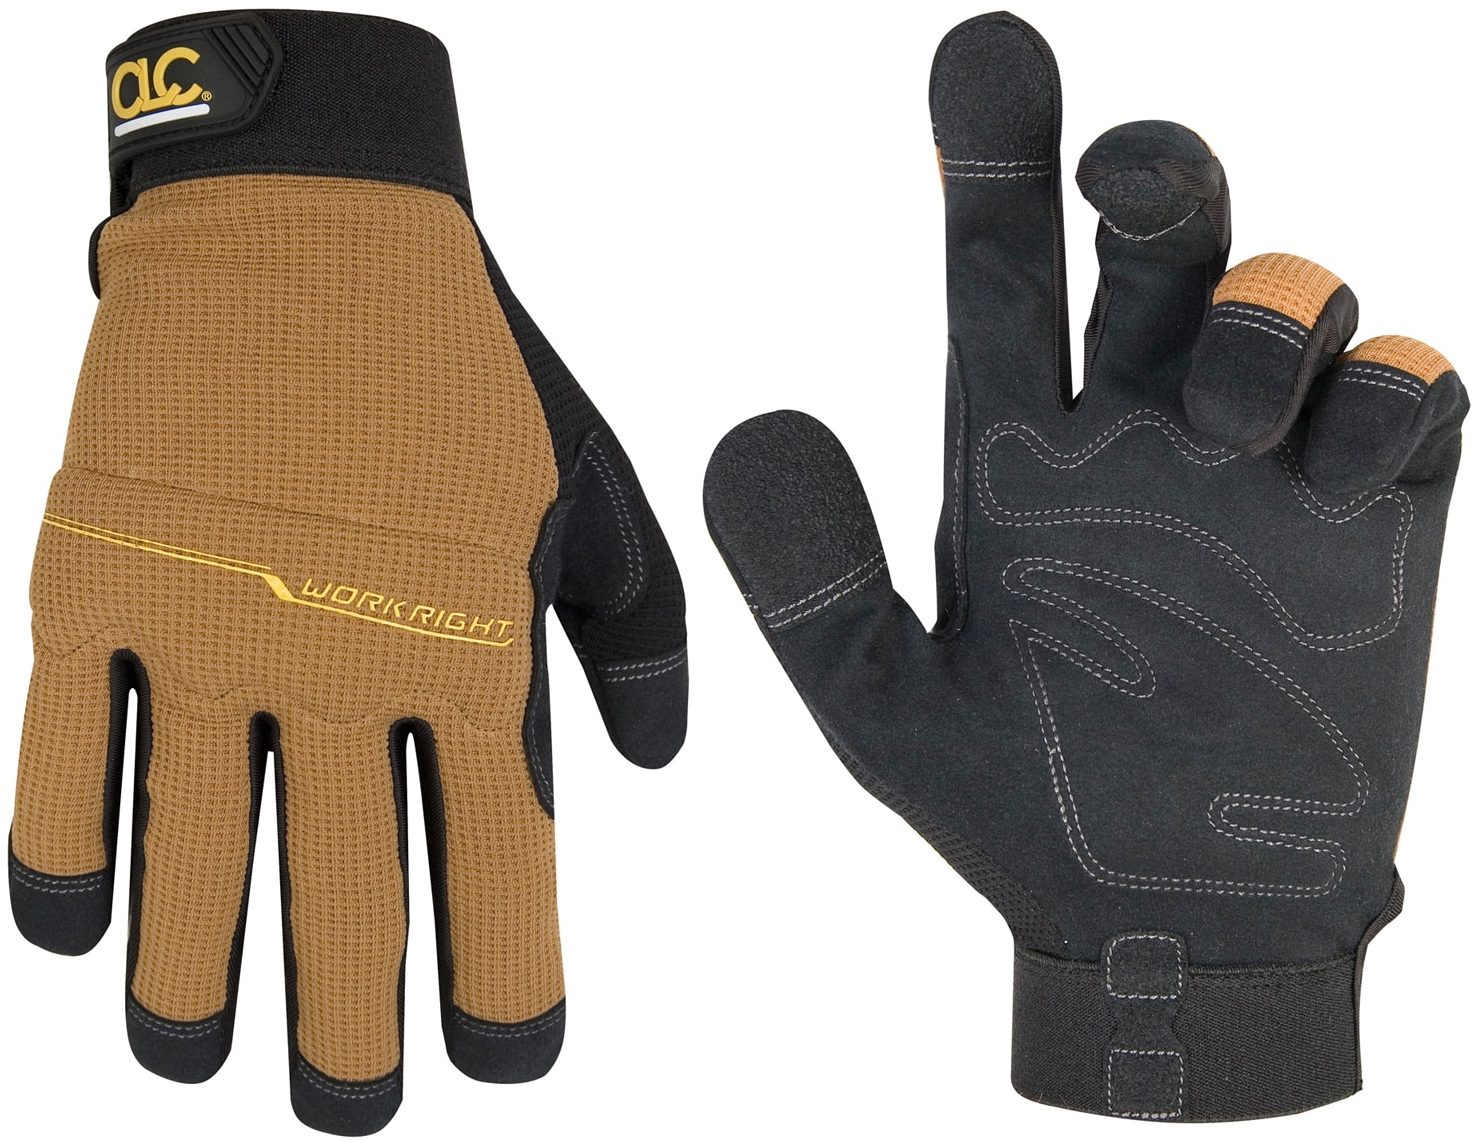 CLC Workright Gloves Only $7.99 Shipped • Hip2Save